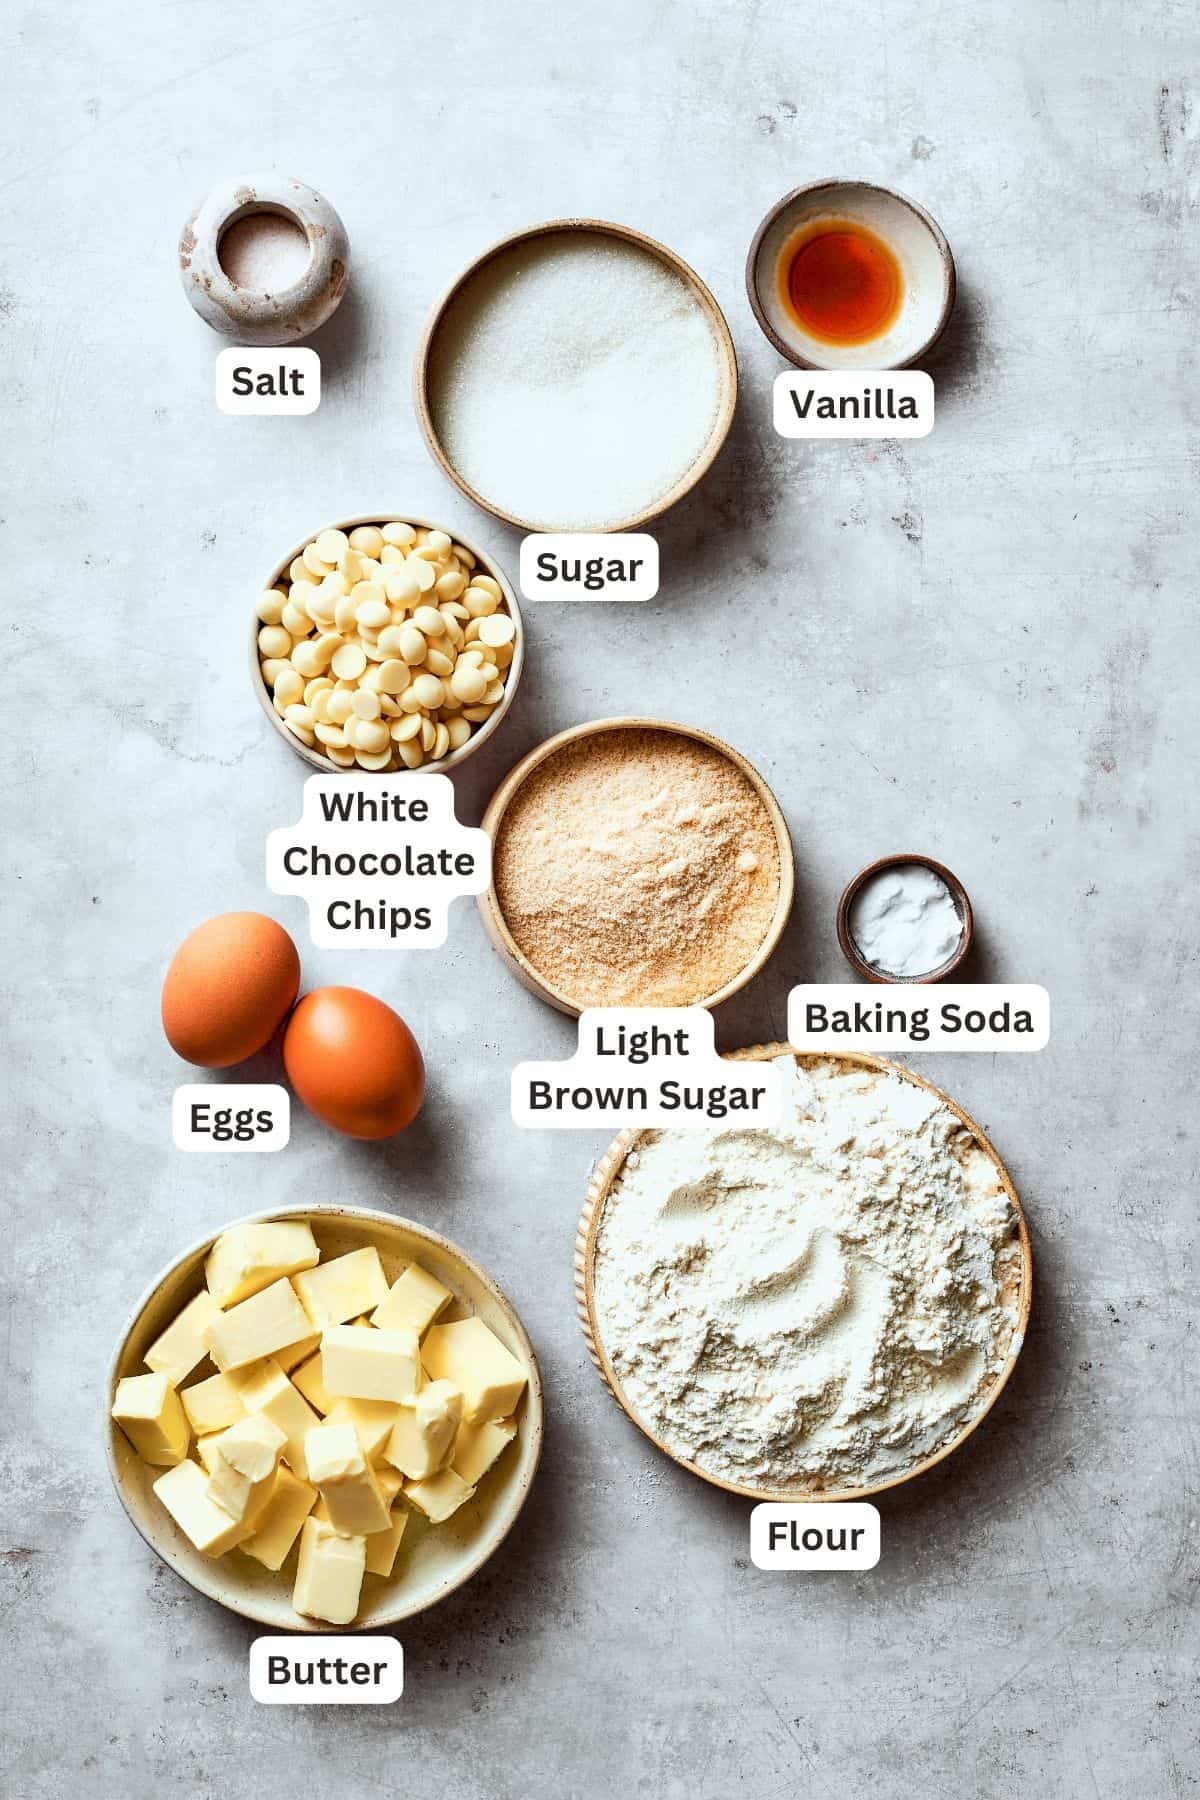 Ingredients for white chocolate chip cookies are shown labelled and portioned out: white chocolate chips, flour, butter, granulated sugar, brown sugar, baking soda, eggs, vanilla, salt.